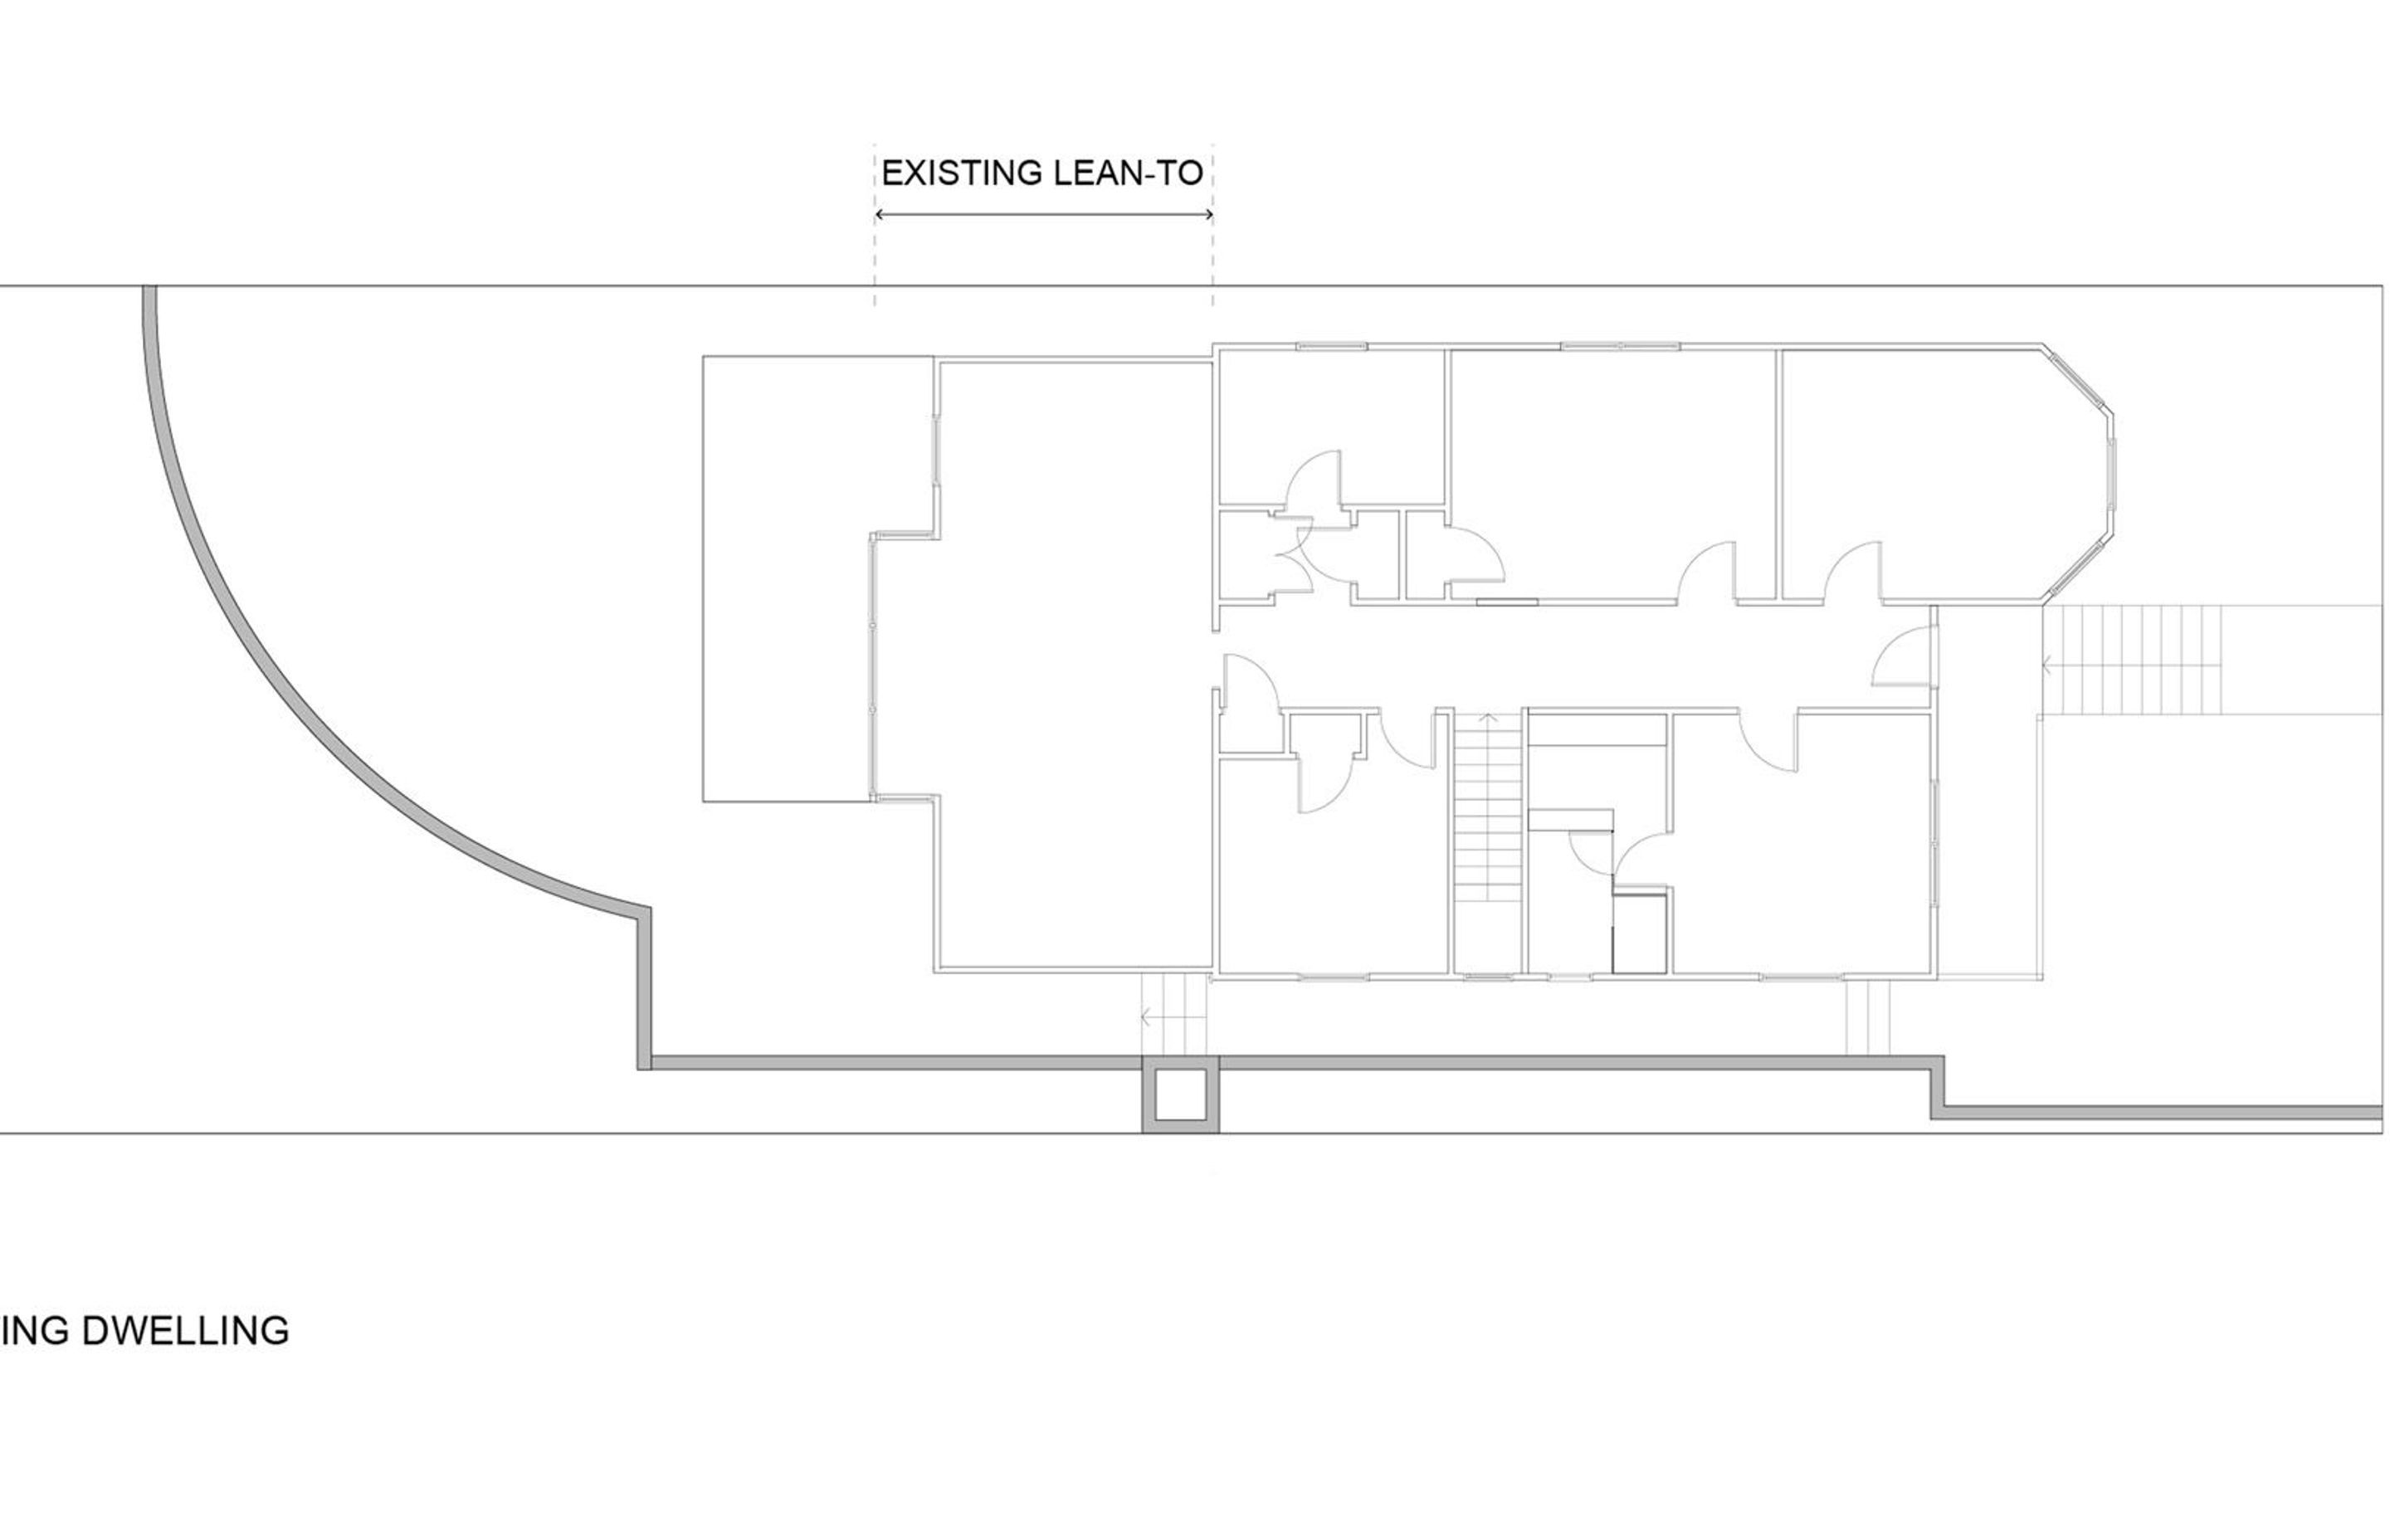 The site and floor plan of the original dwelling before the new Lightbox was added.